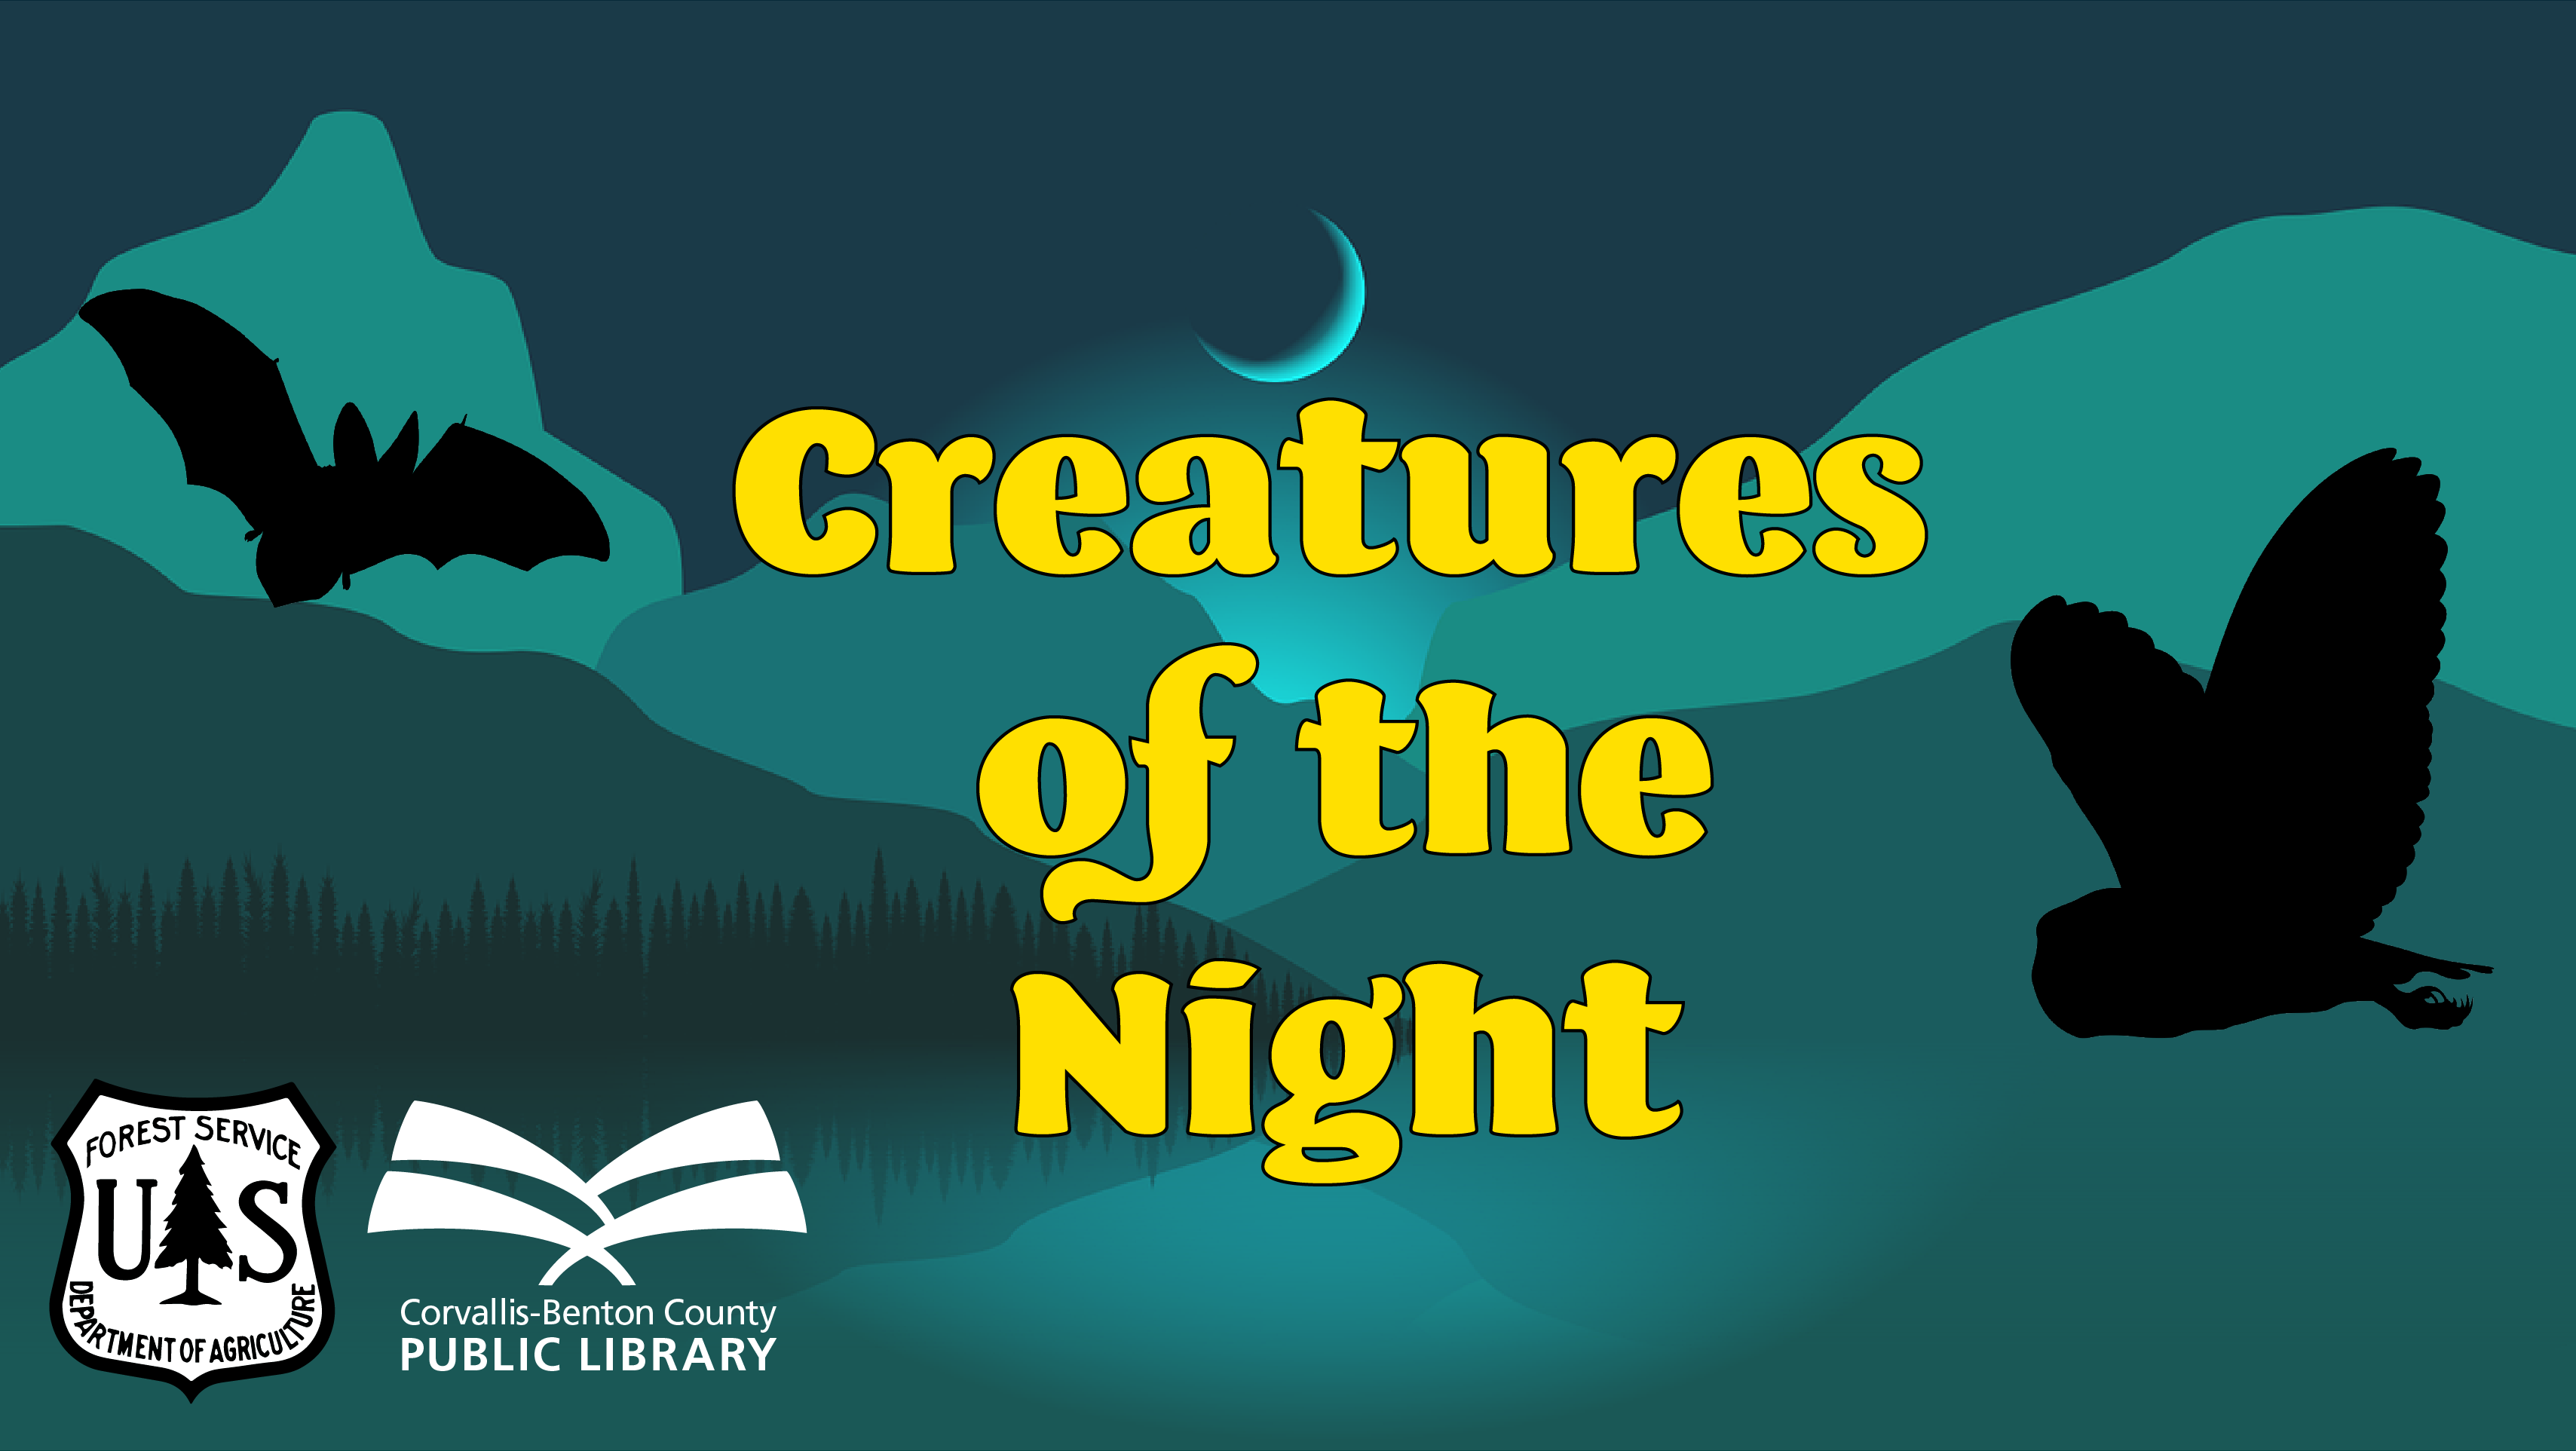 Yellow text that reads "Creatures of the Night" over an image of an outdoor scene with a silhouette of a bat and an owl. Includes logos for the US Forest Service and the Corvallis-Benton County Public Library.